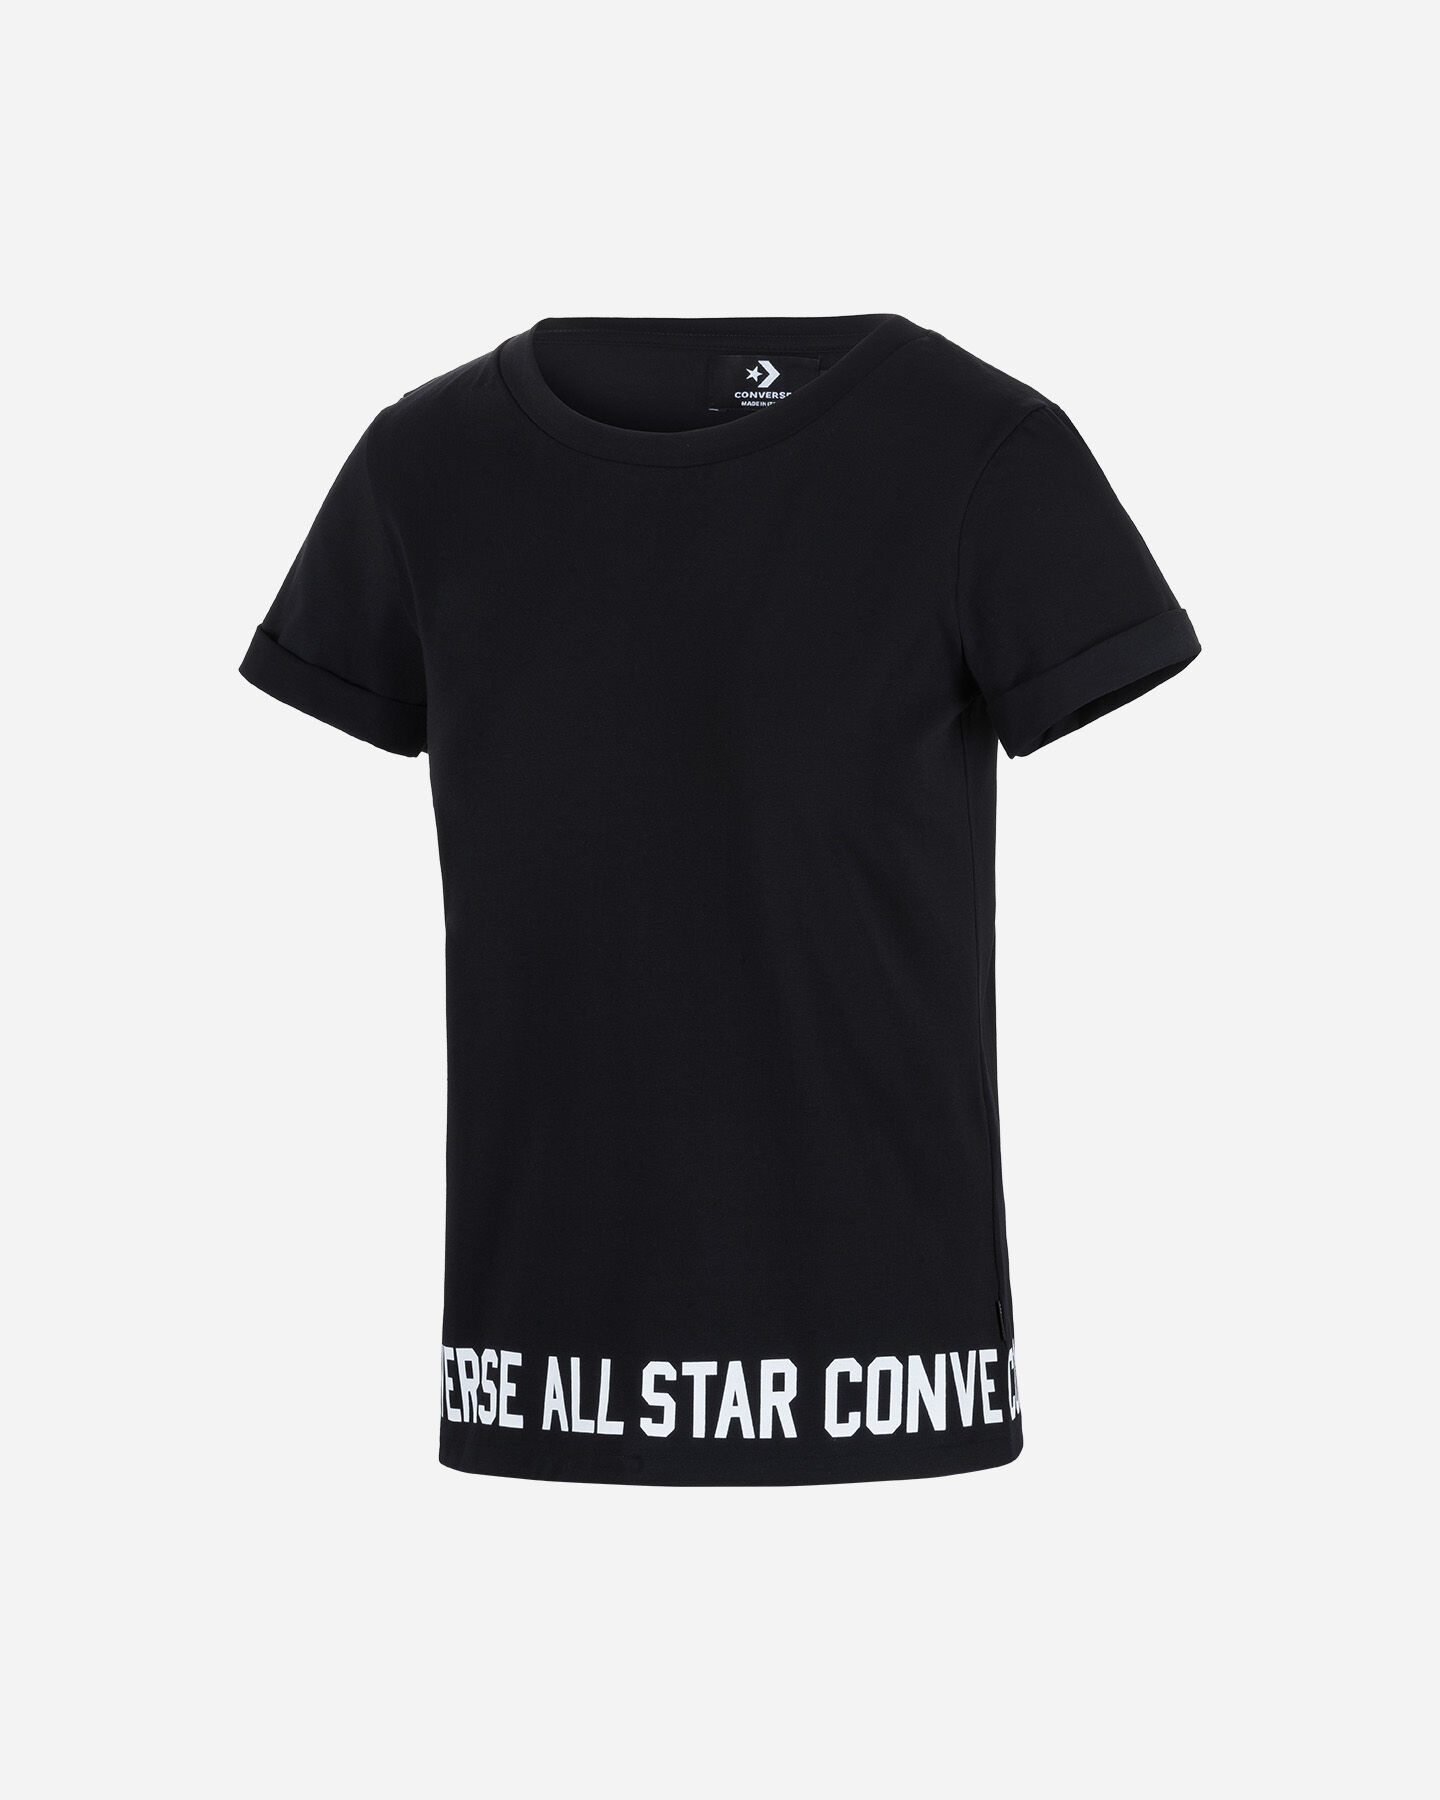  T-Shirt CONVERSE LOGO ROLL UP W S5181172|001|L scatto 0